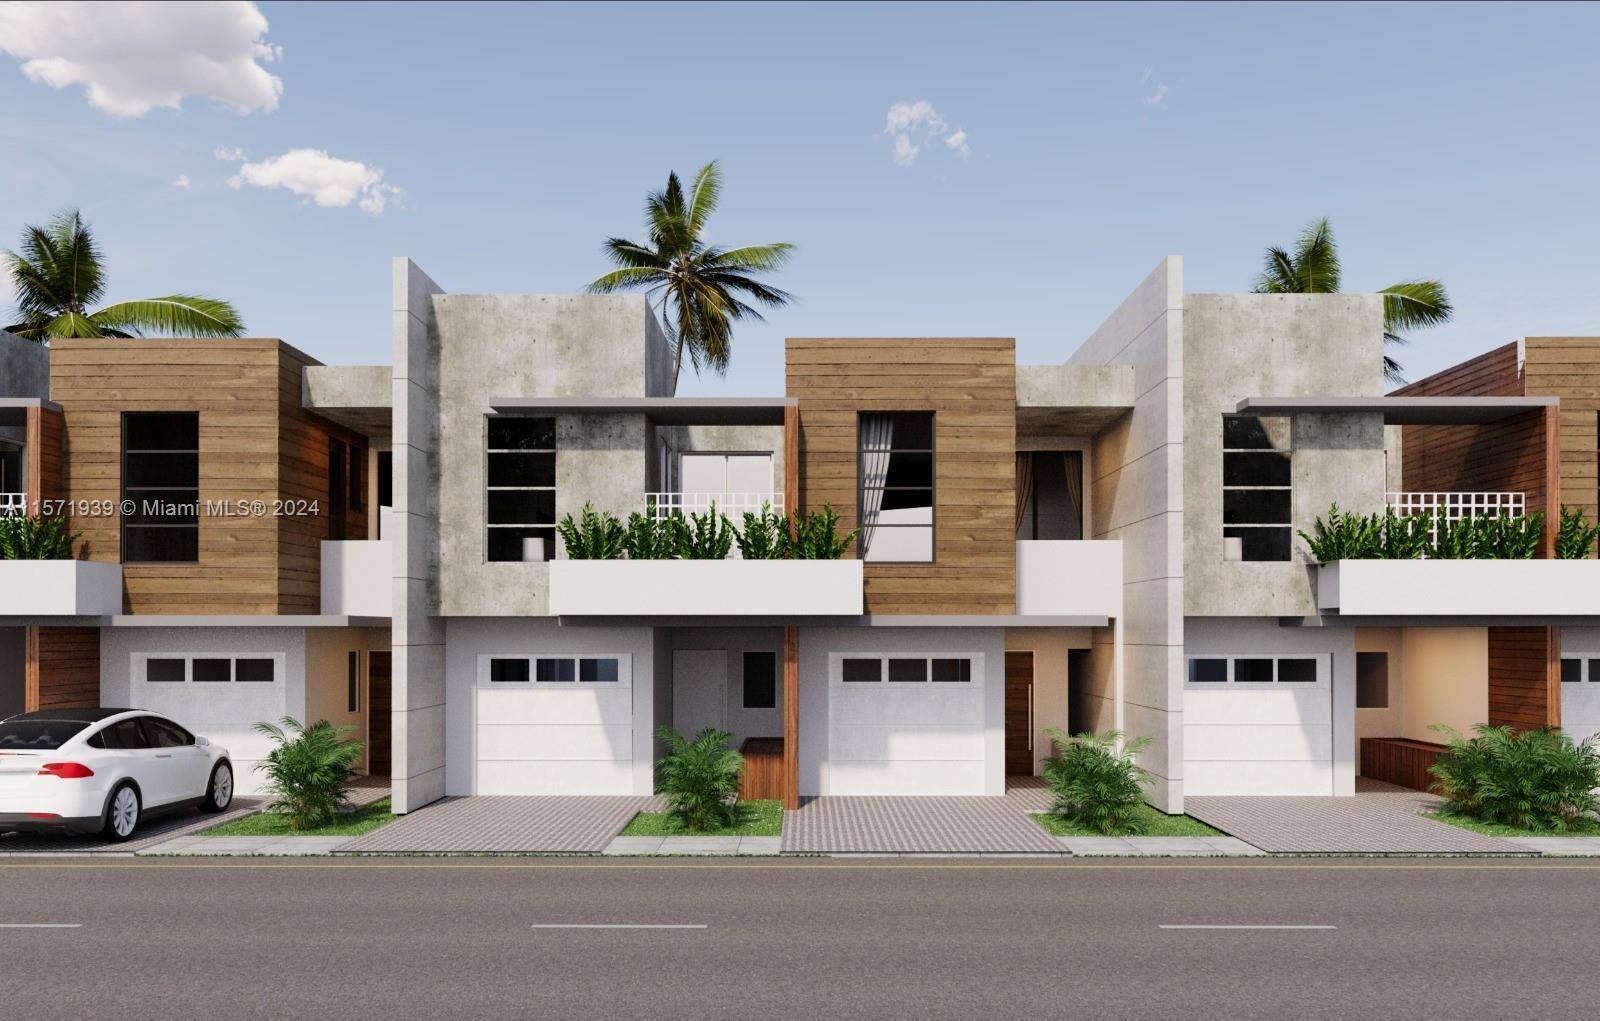 The subject property is an outstanding investment opportunity featuring eight brand new luxury townhomes situated in the highly sought after area of Hollywood, Florida.